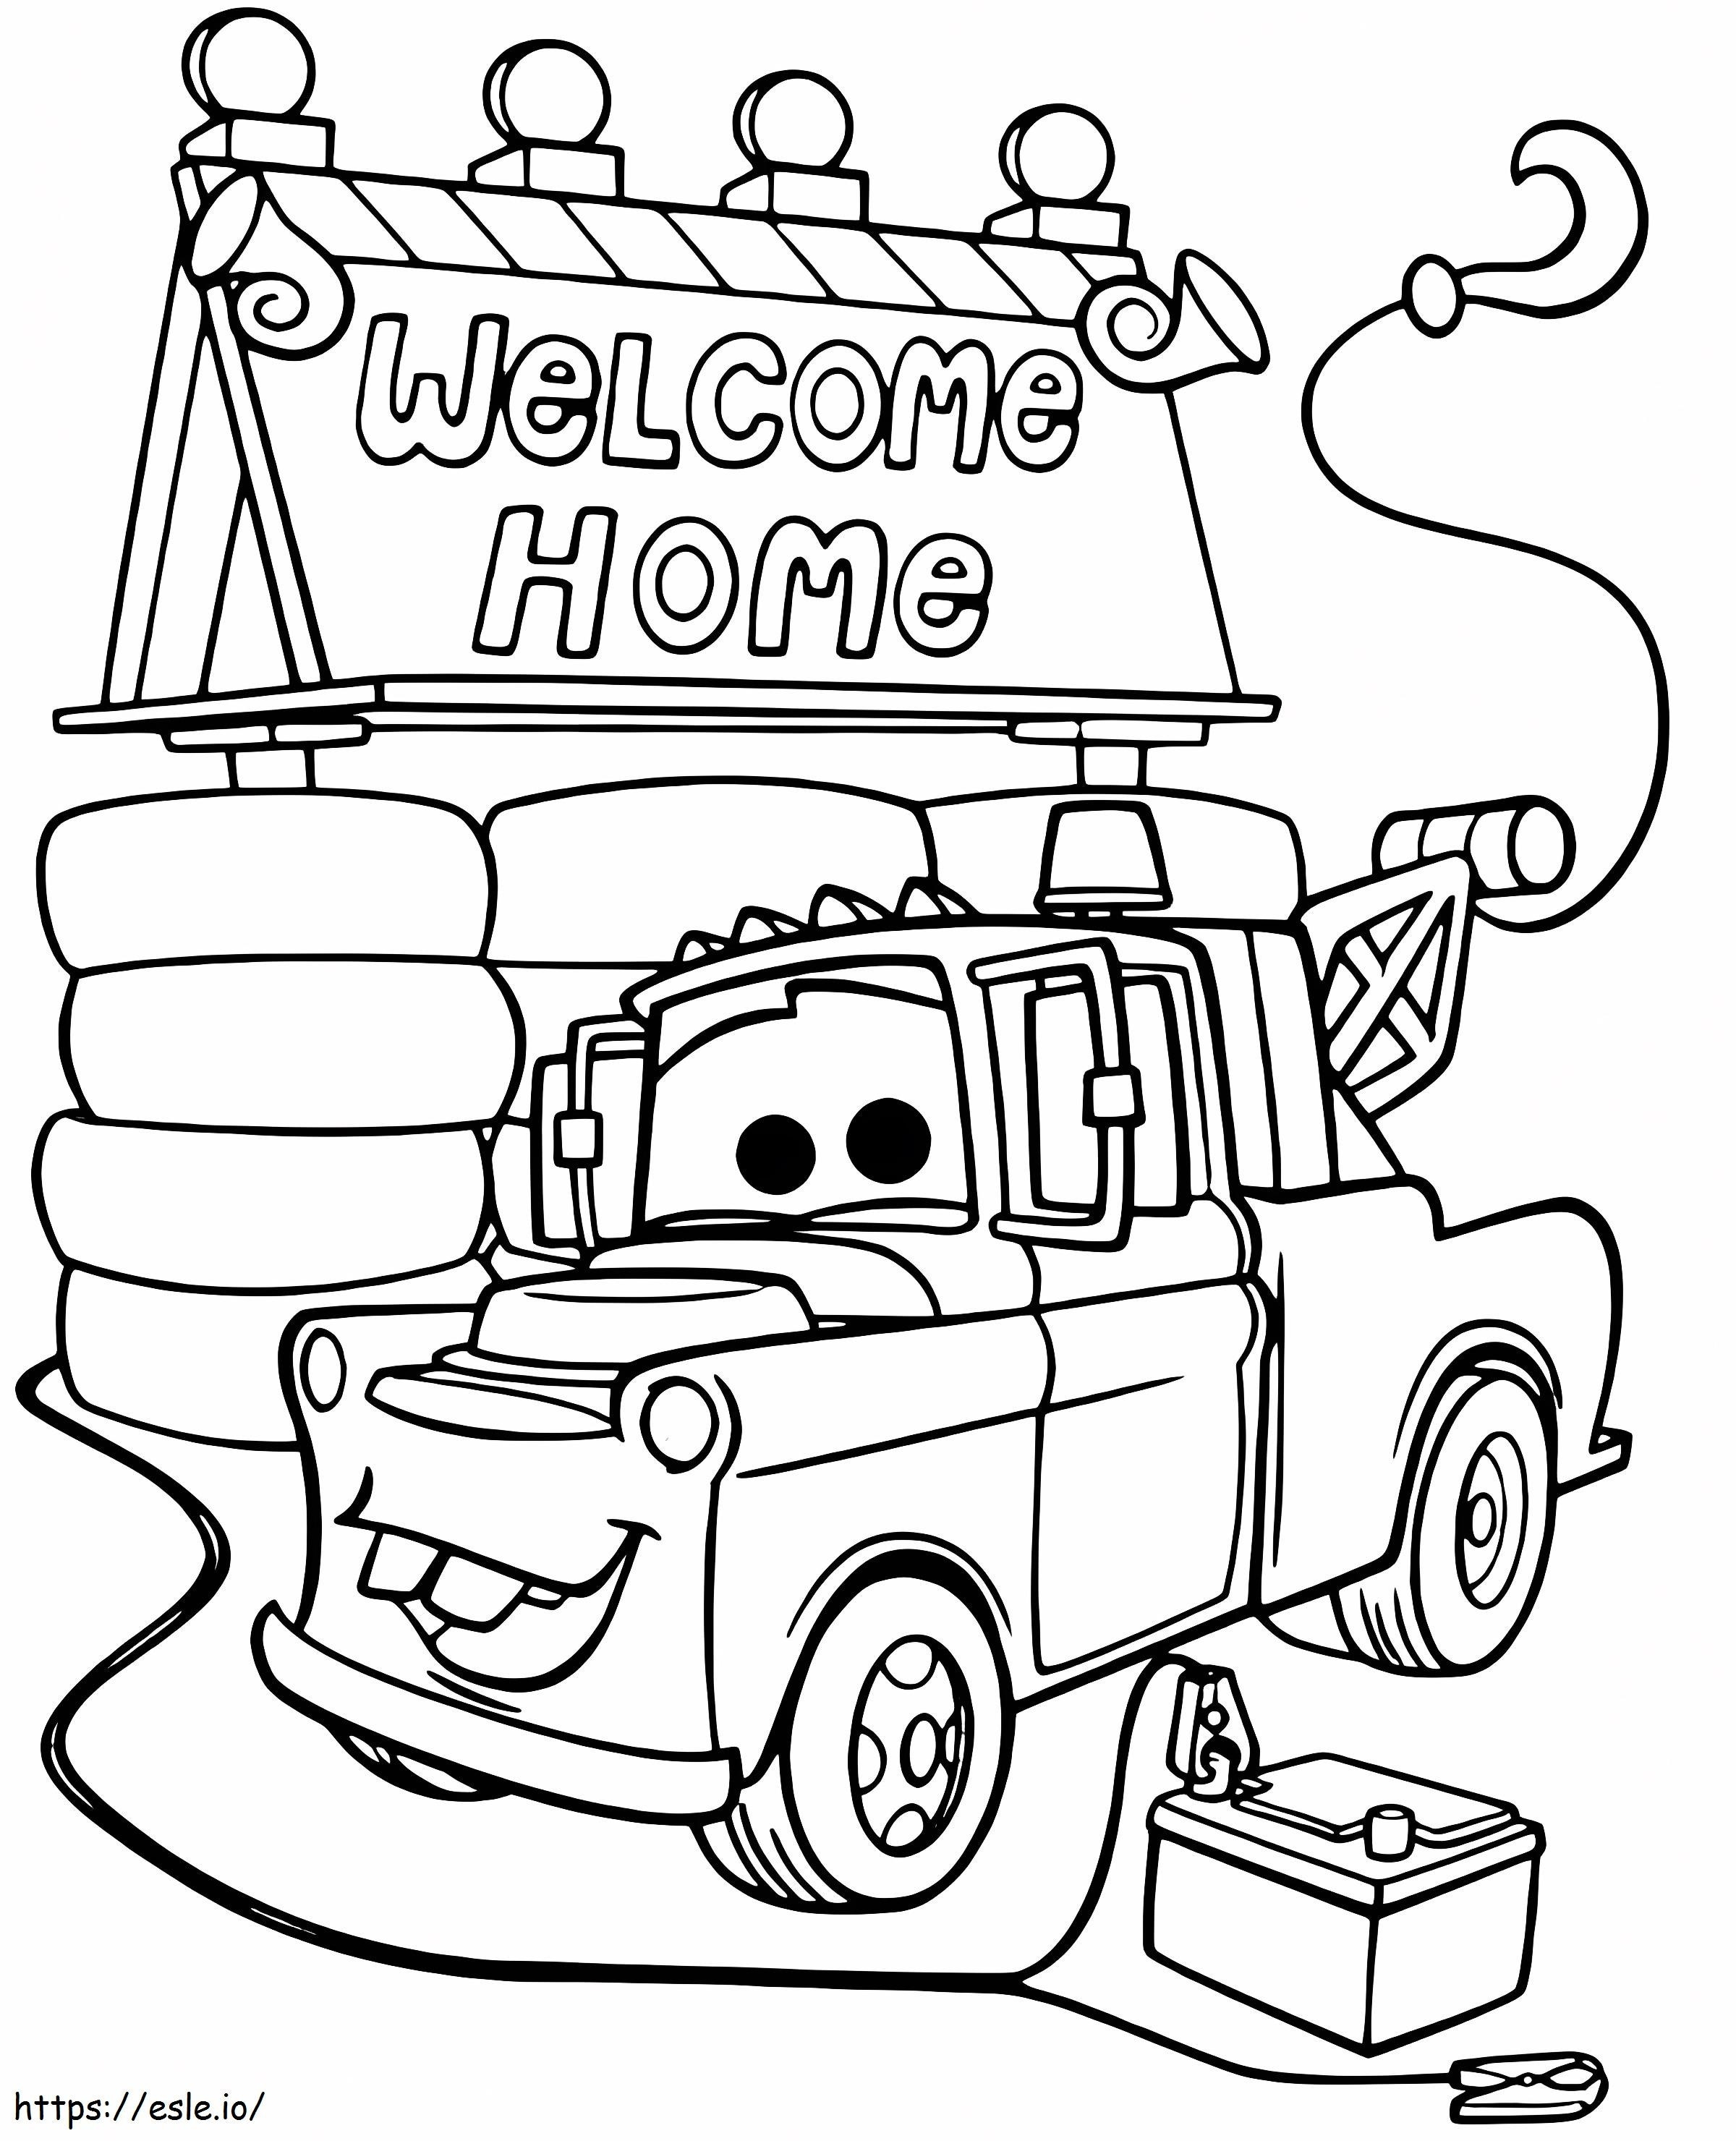 Cartoon Welcome Home coloring page